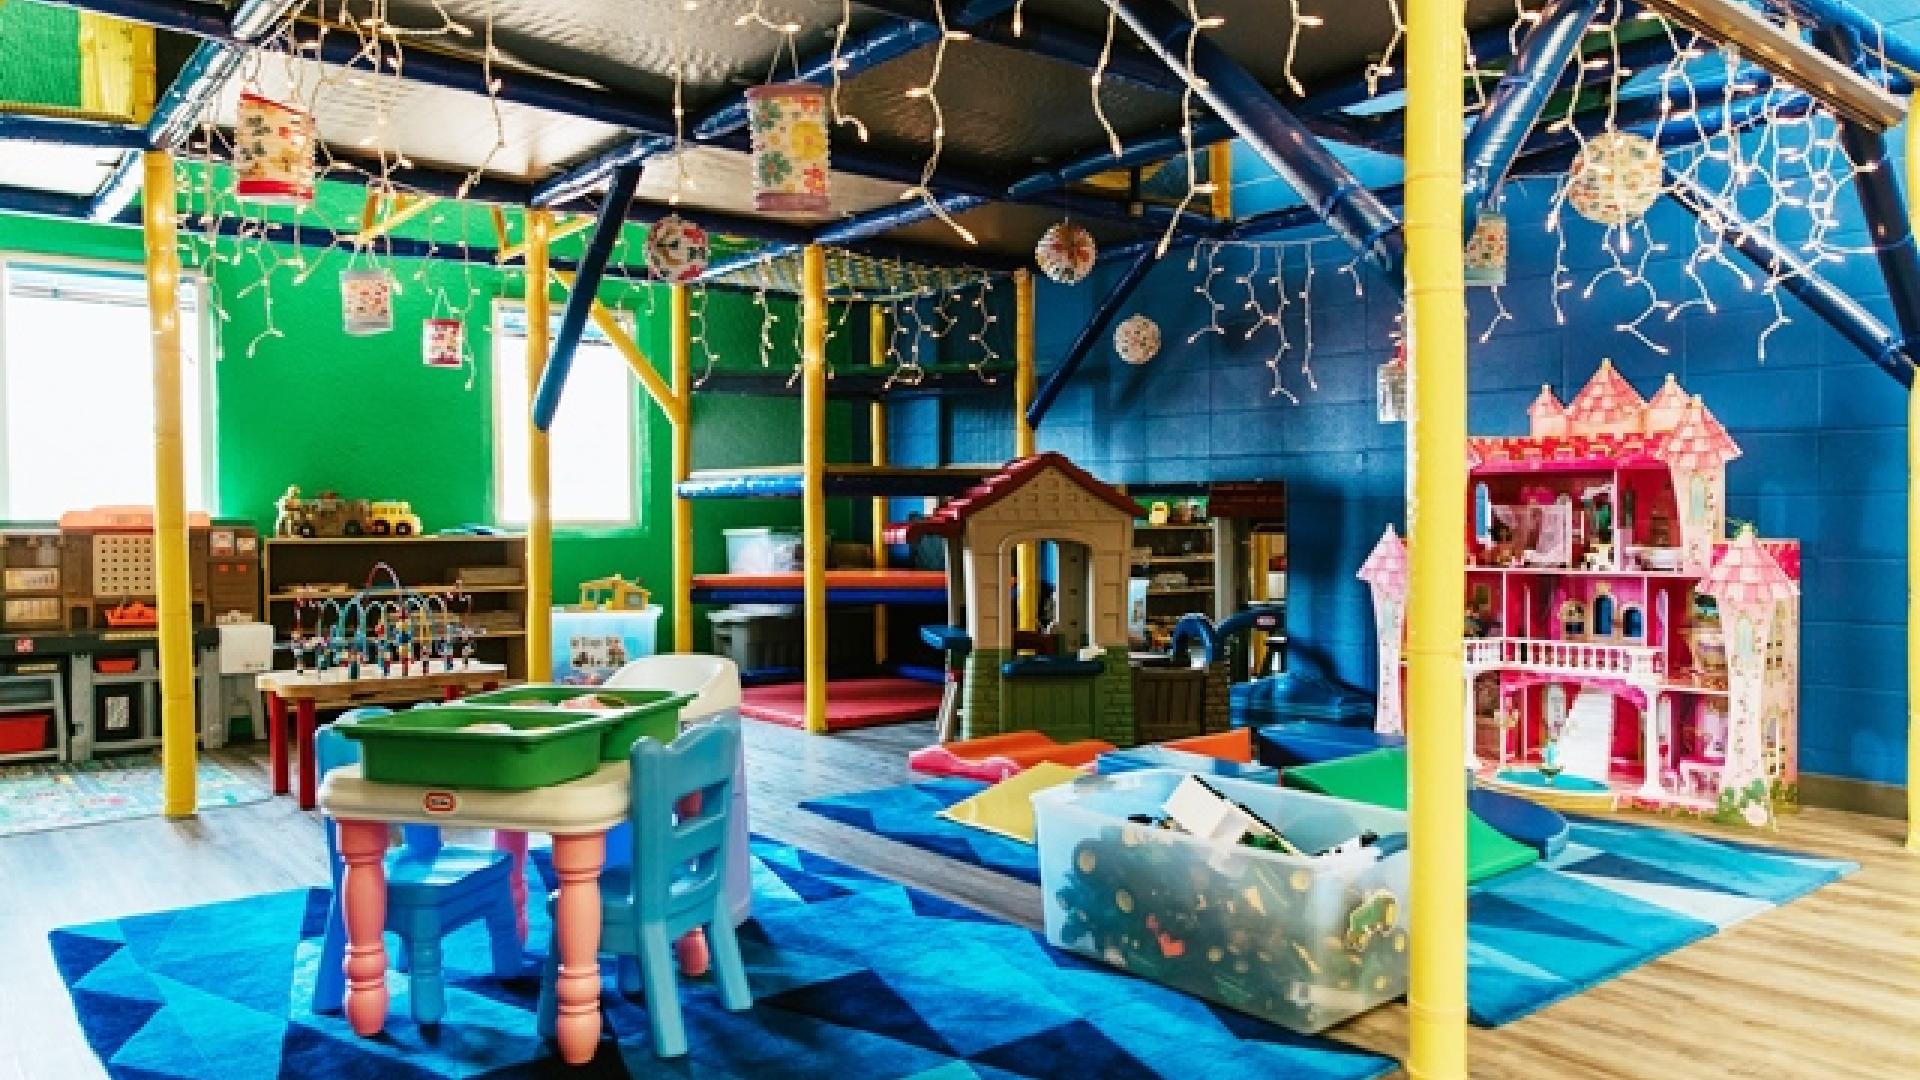 Interior of playground. There are tables, chairs, dollhouses and a bookshelf in the room. The room is decorated with hanging lights and colourful rugs.